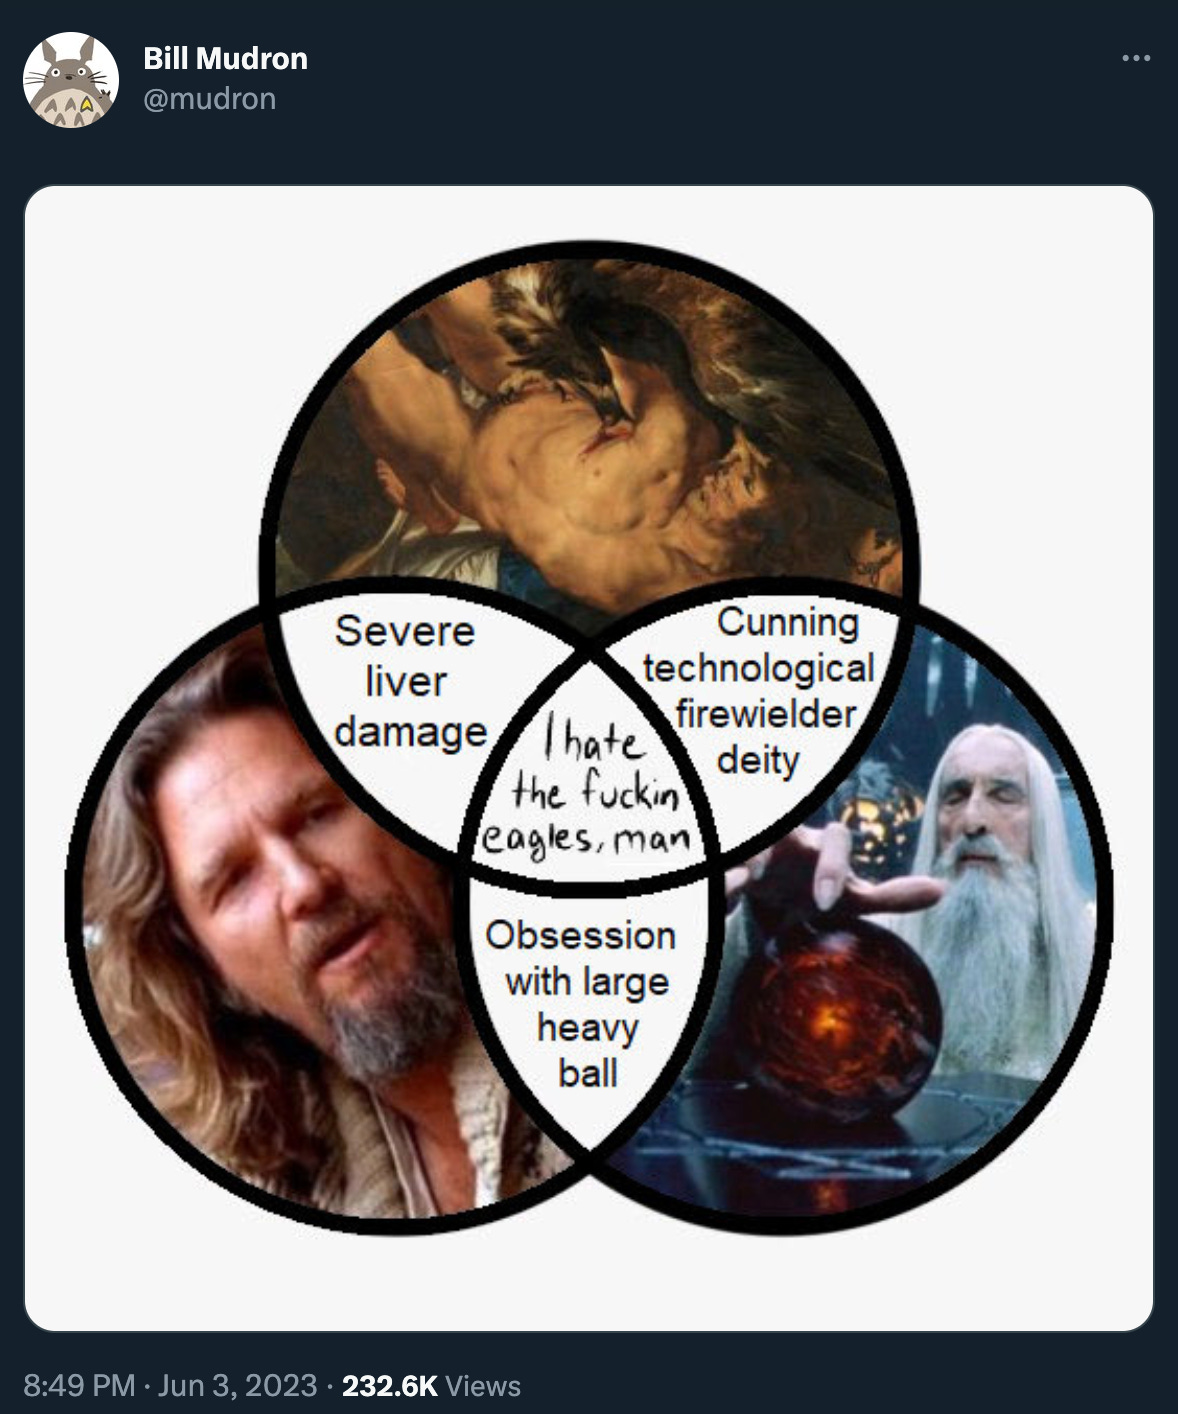 Tweet by Bill Mudron: A Venn diagram where Prometheus and The Dude overlap at “Severe liver damage,” The Dude and Saruman overlap at “Obsession with large heavy ball,” Saruman and Prometheus overlap at “Cunning technological firewielder deity,” and all three meet in the center at “I hate the fuckin eagles, man.” 